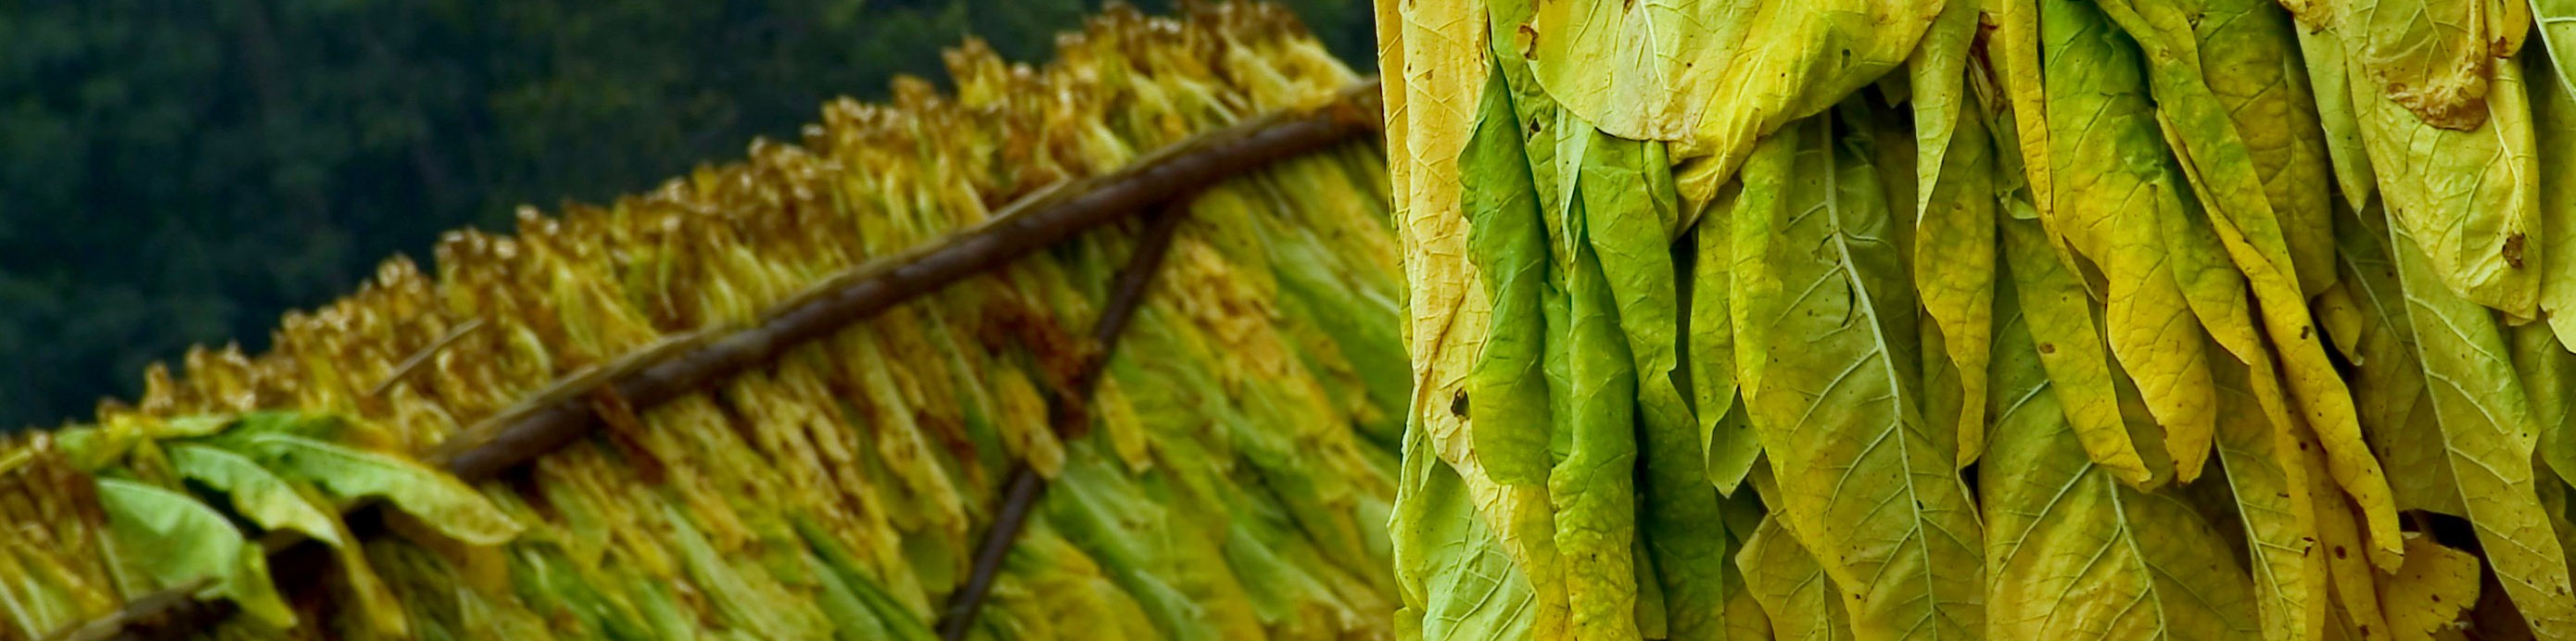 Tobacco Leaves Hanging in a Barn - Curing Tobacco Leaves